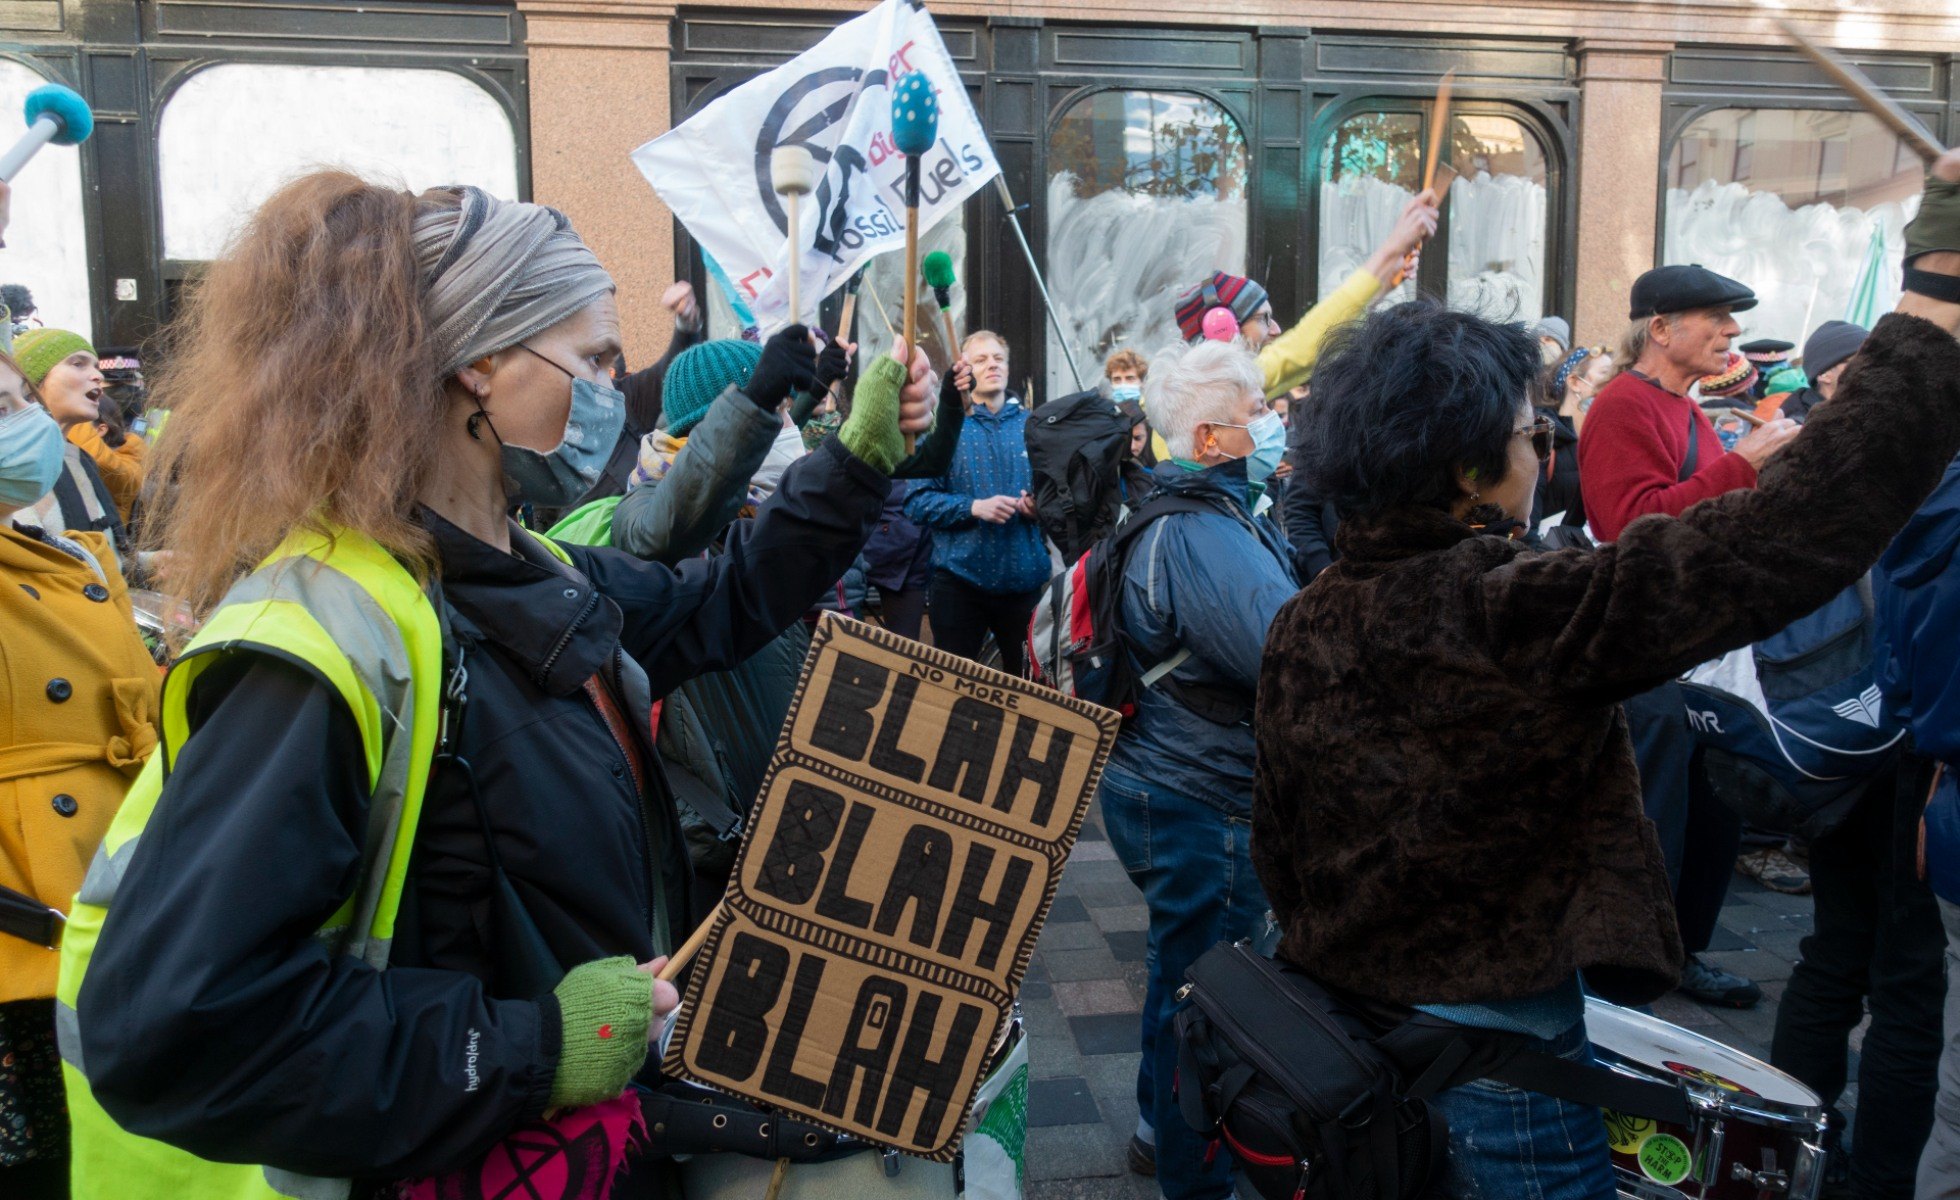 Protest outside of COP26. A women wearing a neon safety vest is holding a cardboard sign that says "Blah, blah, blah"